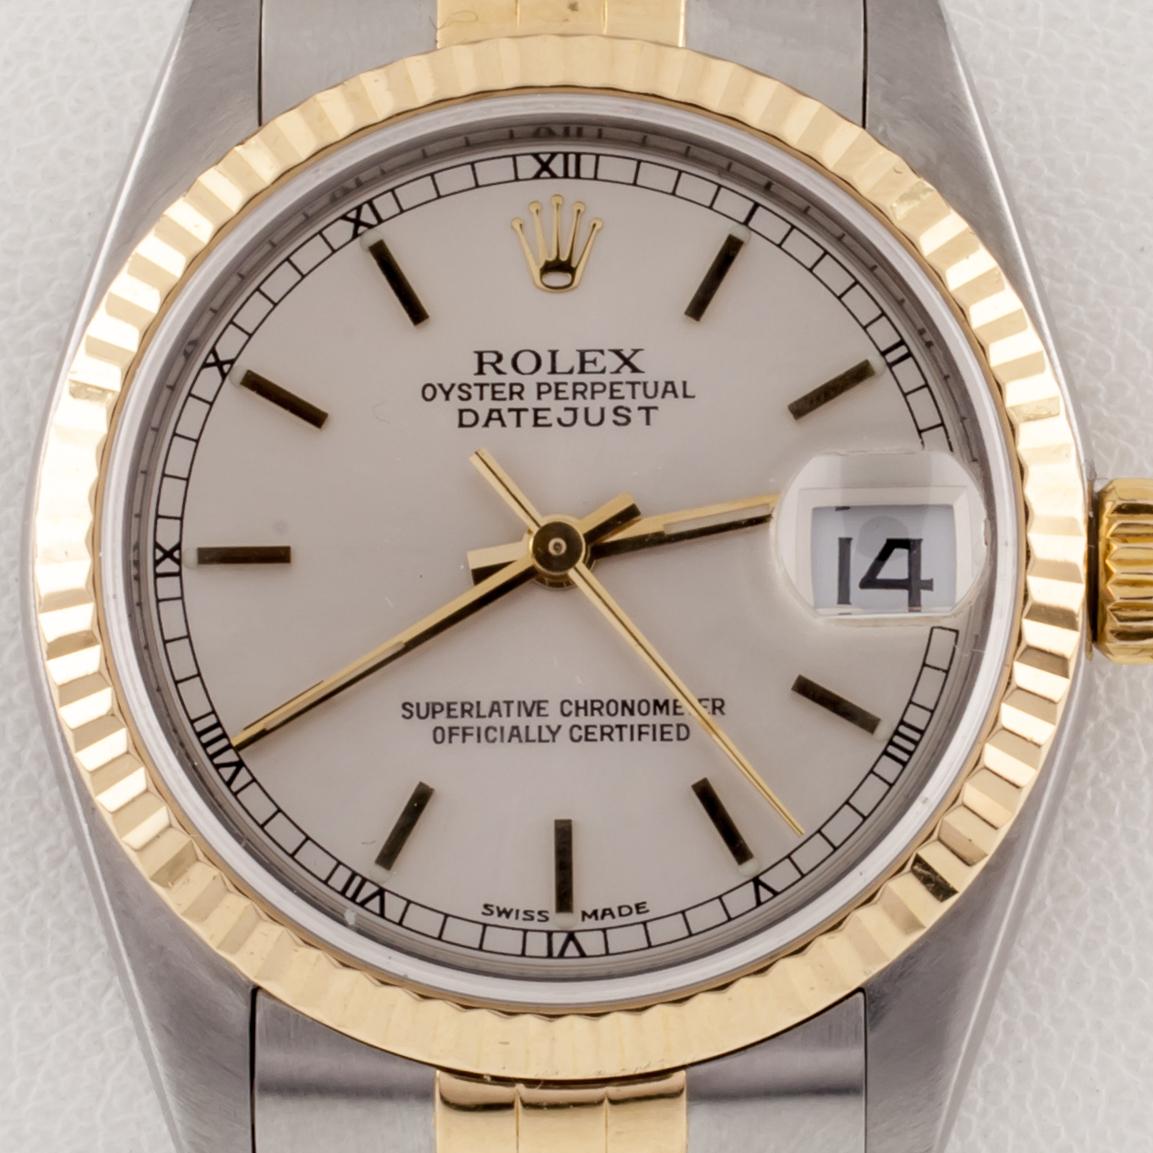 Rolex Midsize Two-Tone SS + 18k Jubilee OPDJ Datejust 78273 Automatic Watch
Model: Oyster Perpetual Datejust
Model #78273
Serial #A9661XX
Movement: 2235 (31 Jewels)
Movement Serial #A0139158
Year: 1999
Stainless Steel Case w/ Fluted 18k Yellow Gold